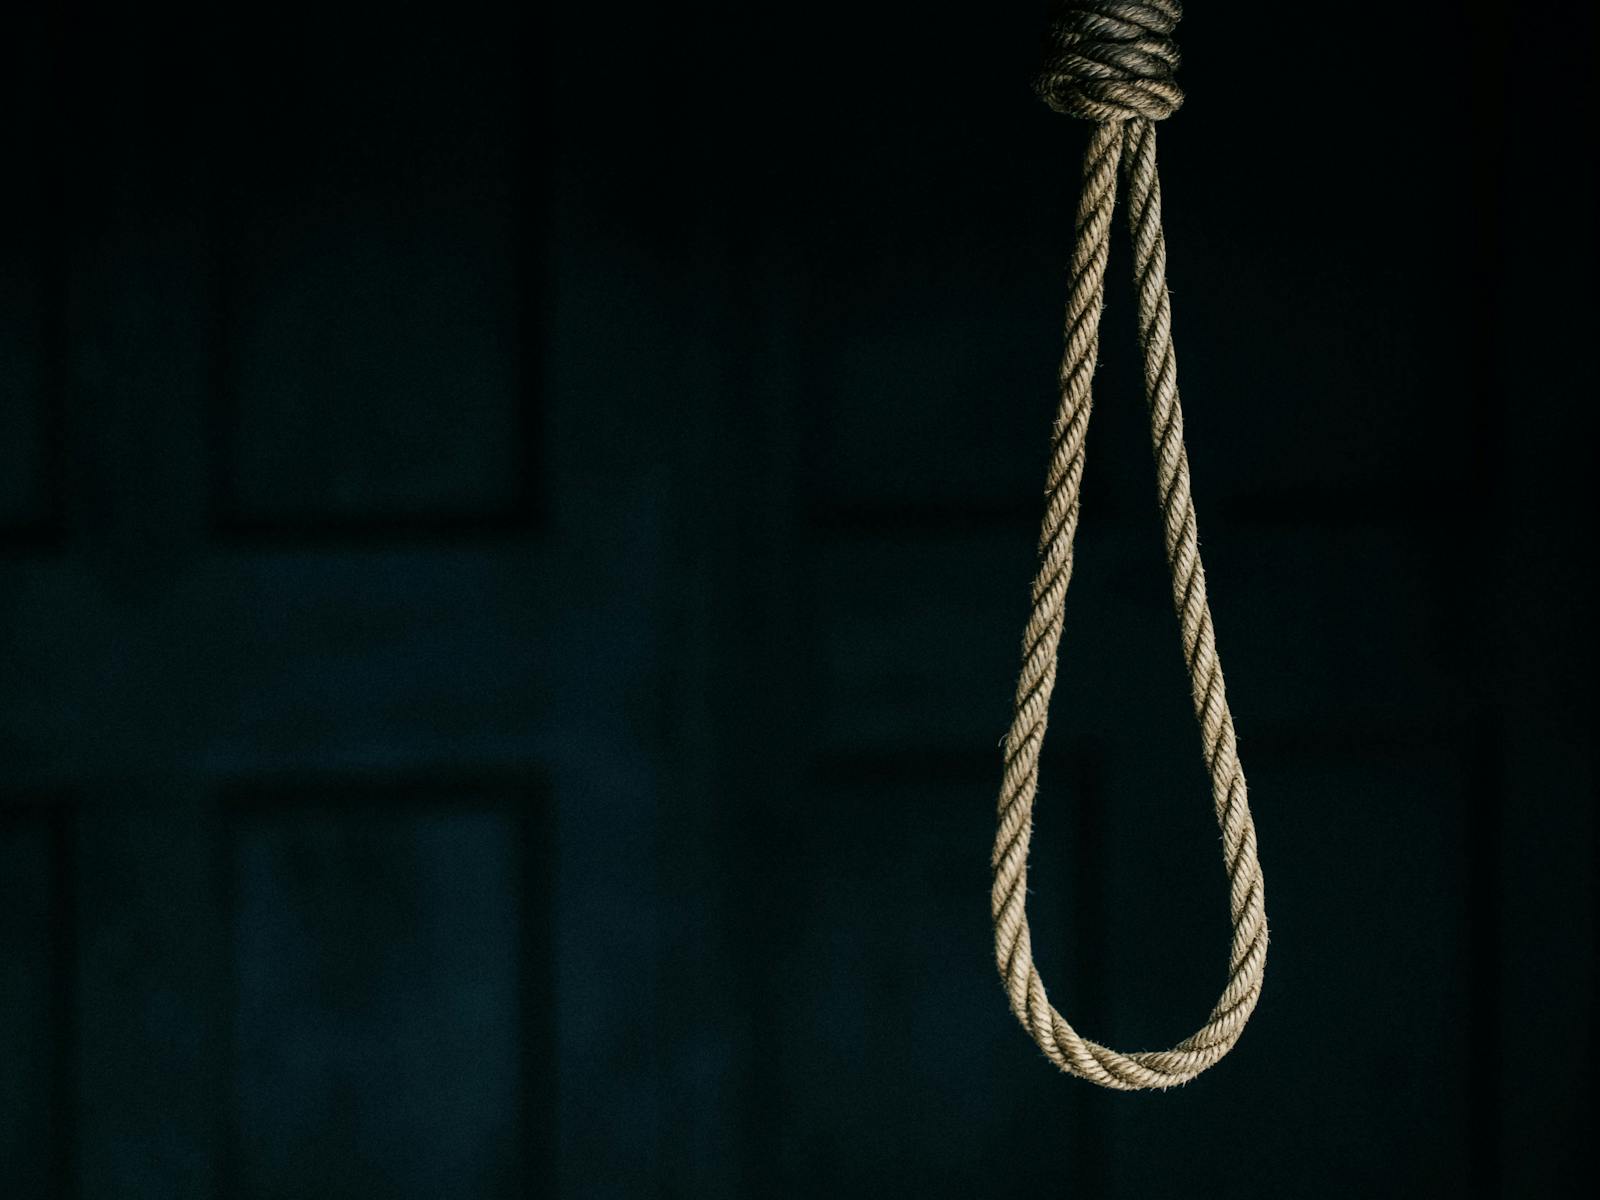 Noose in the Gallows at the Hobart Convict Penitentiary